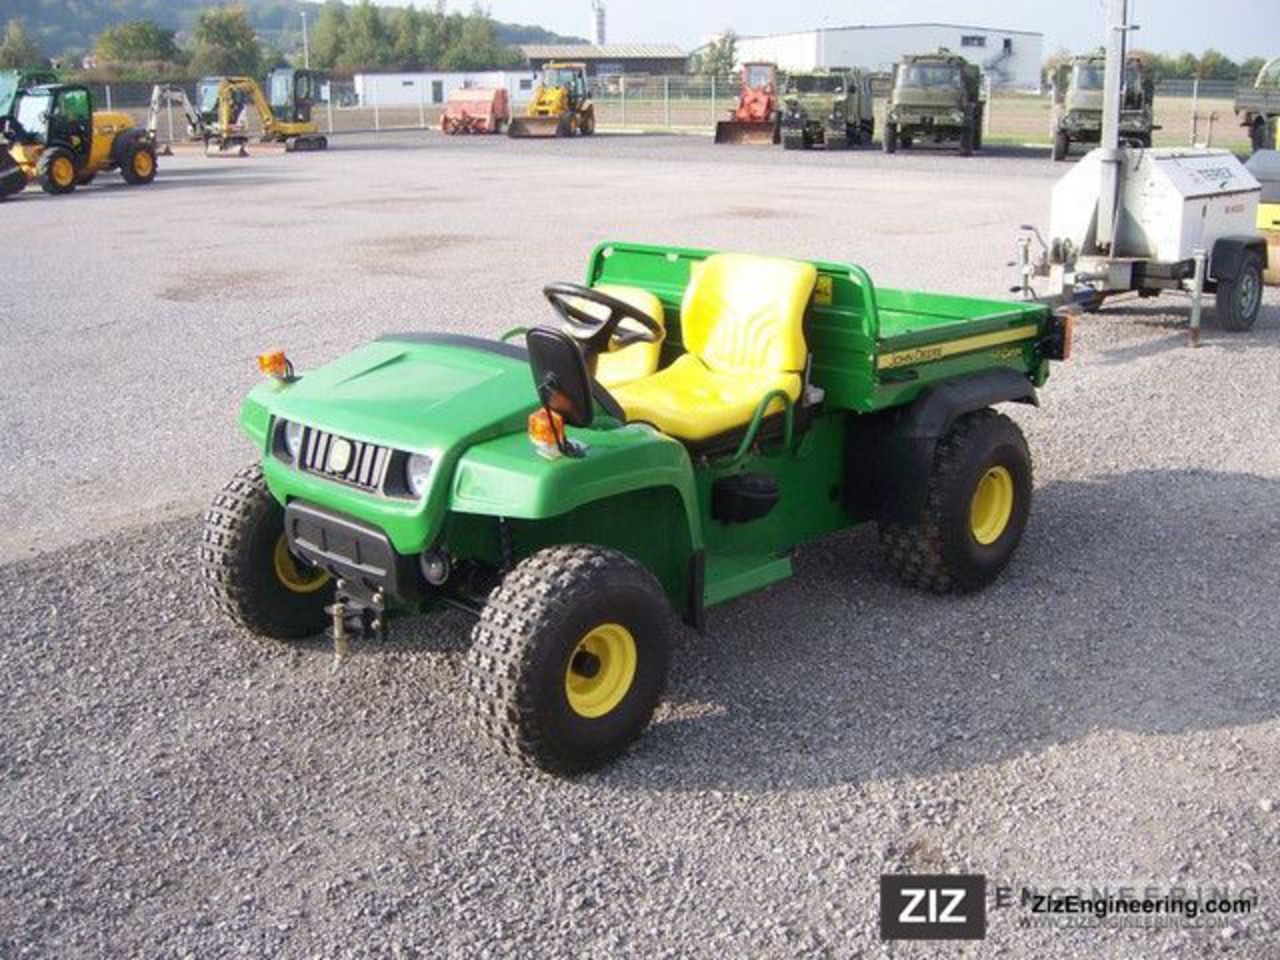 John Deere GATOR TS 2010 Agricultural Loader wagon Photo and Specs